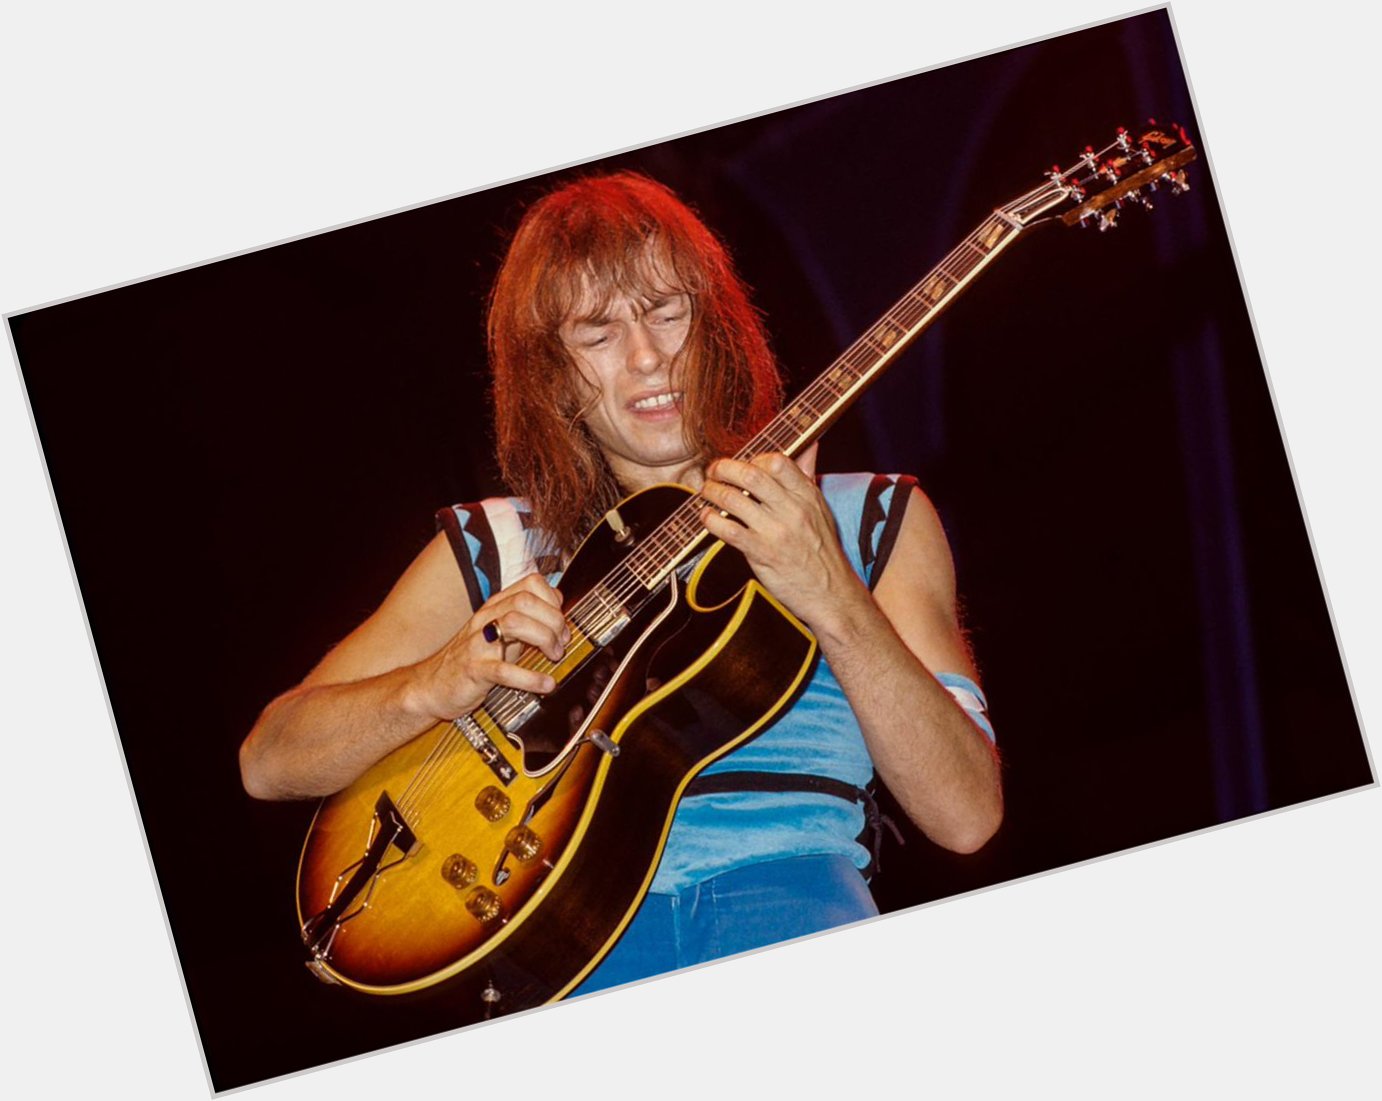 A very happy birthday to the one & only Steve Howe!!! 